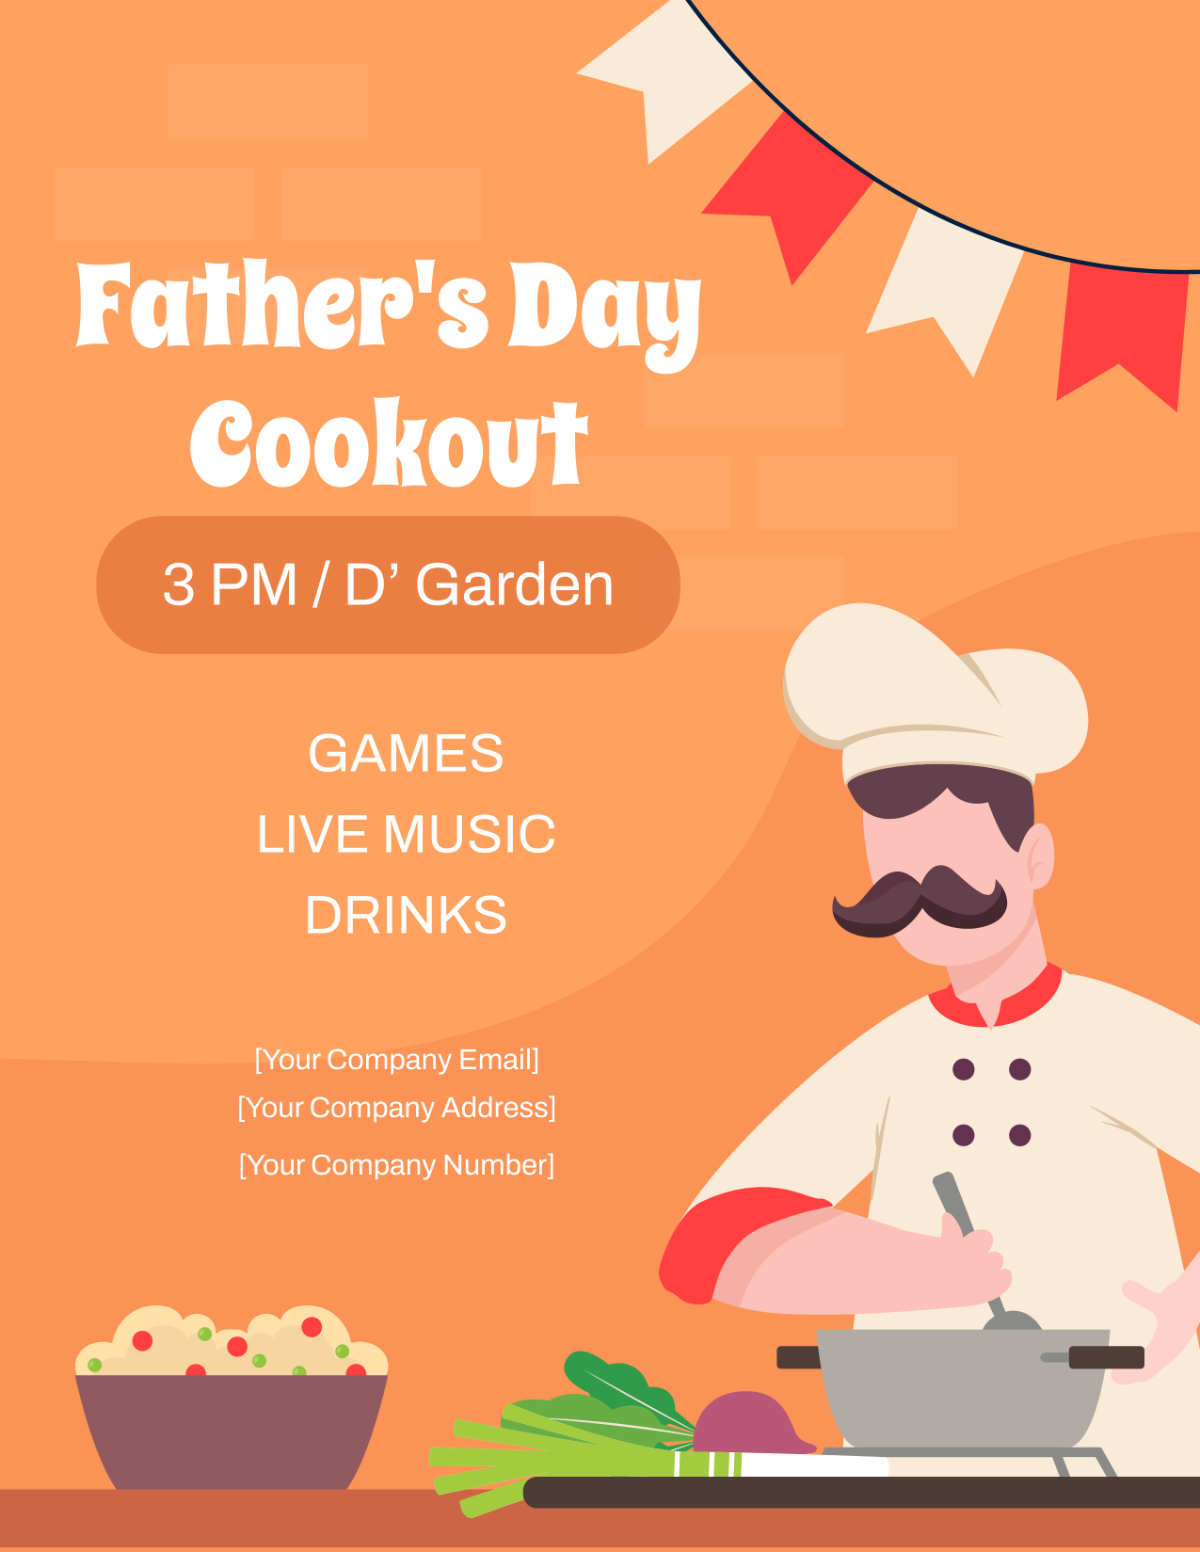 Father's Day Cookout Flyer